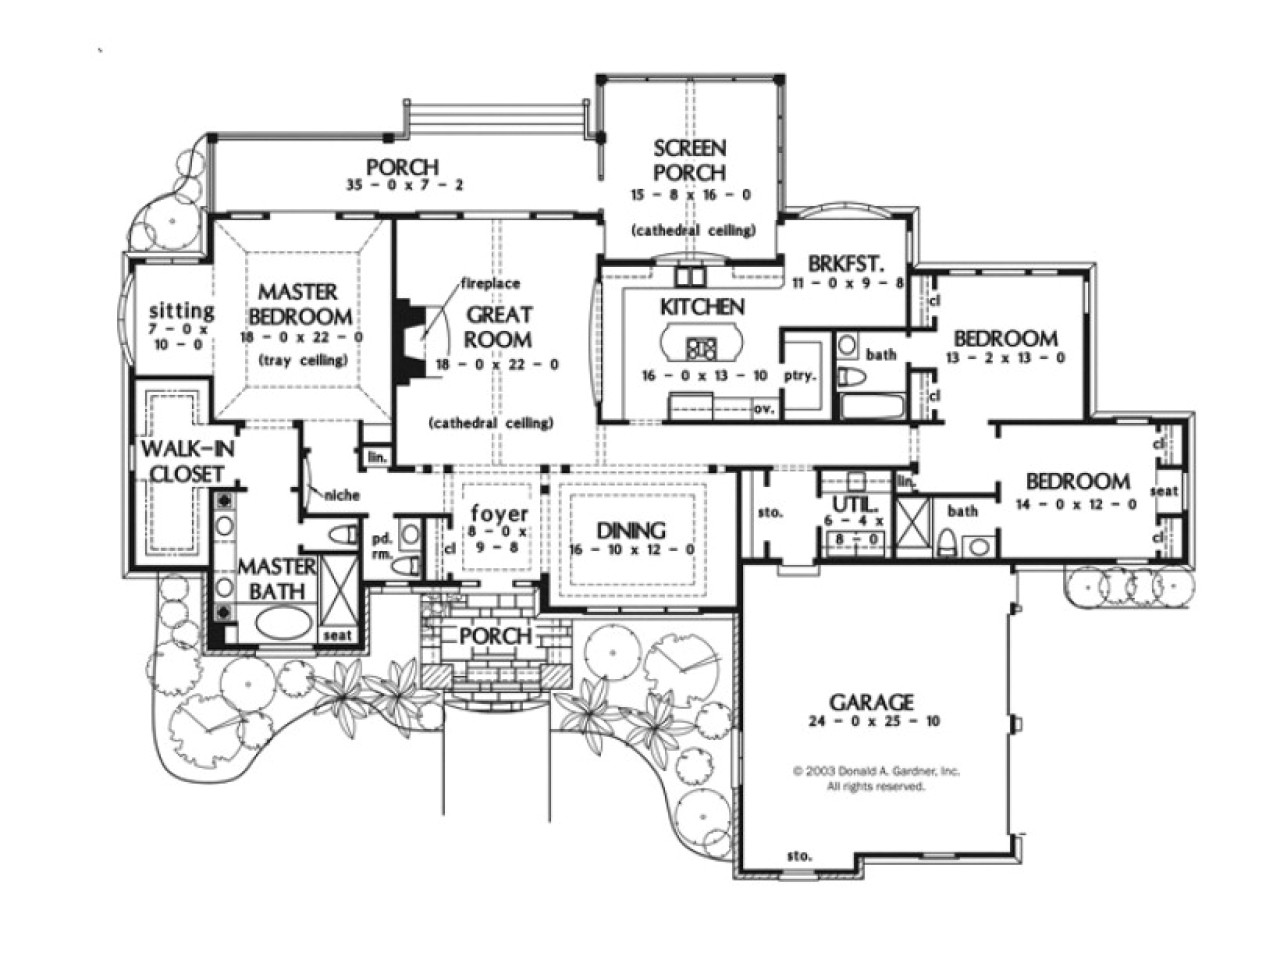 09f8521b239862cc one story luxury house plans best one story house plans